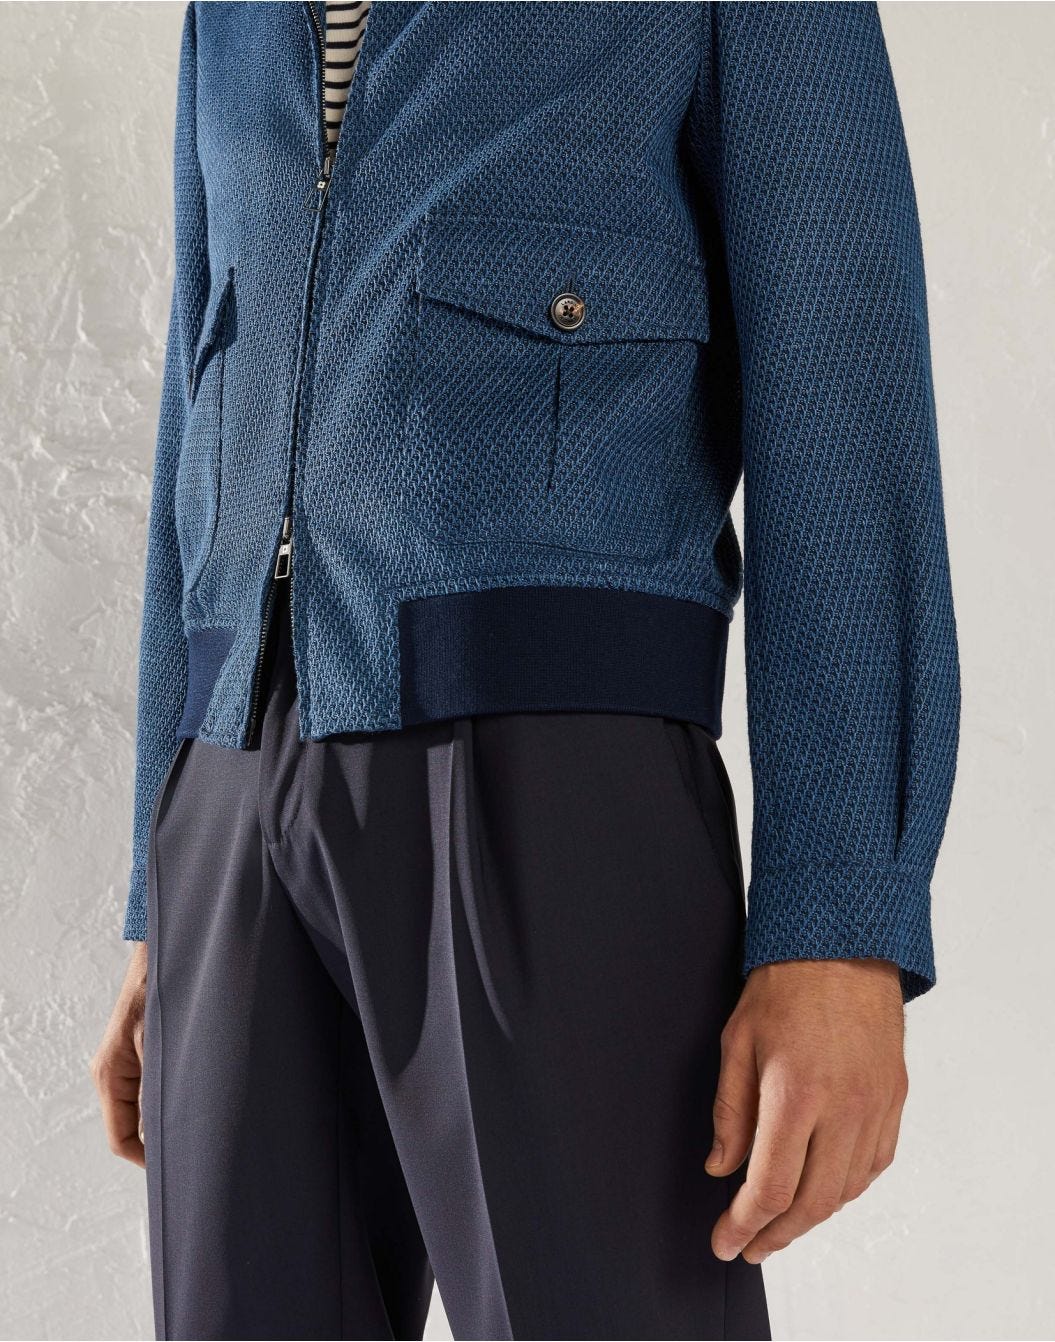 Linen and polyester jacket - Liknit